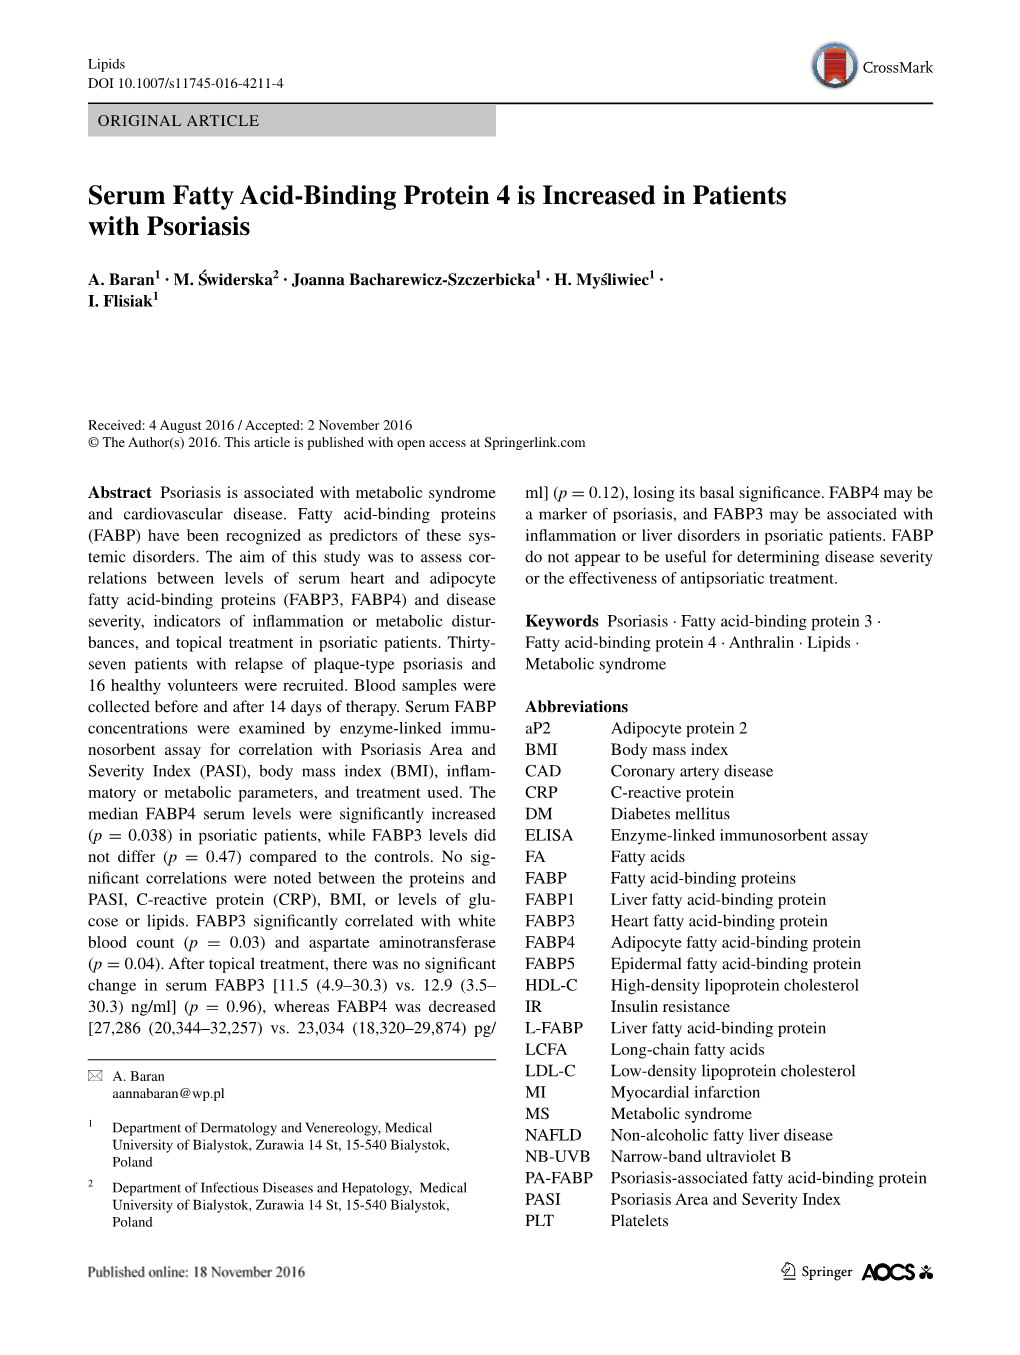 Serum Fatty Acid-Binding Protein 4 Is Increased in Patients with Psoriasis